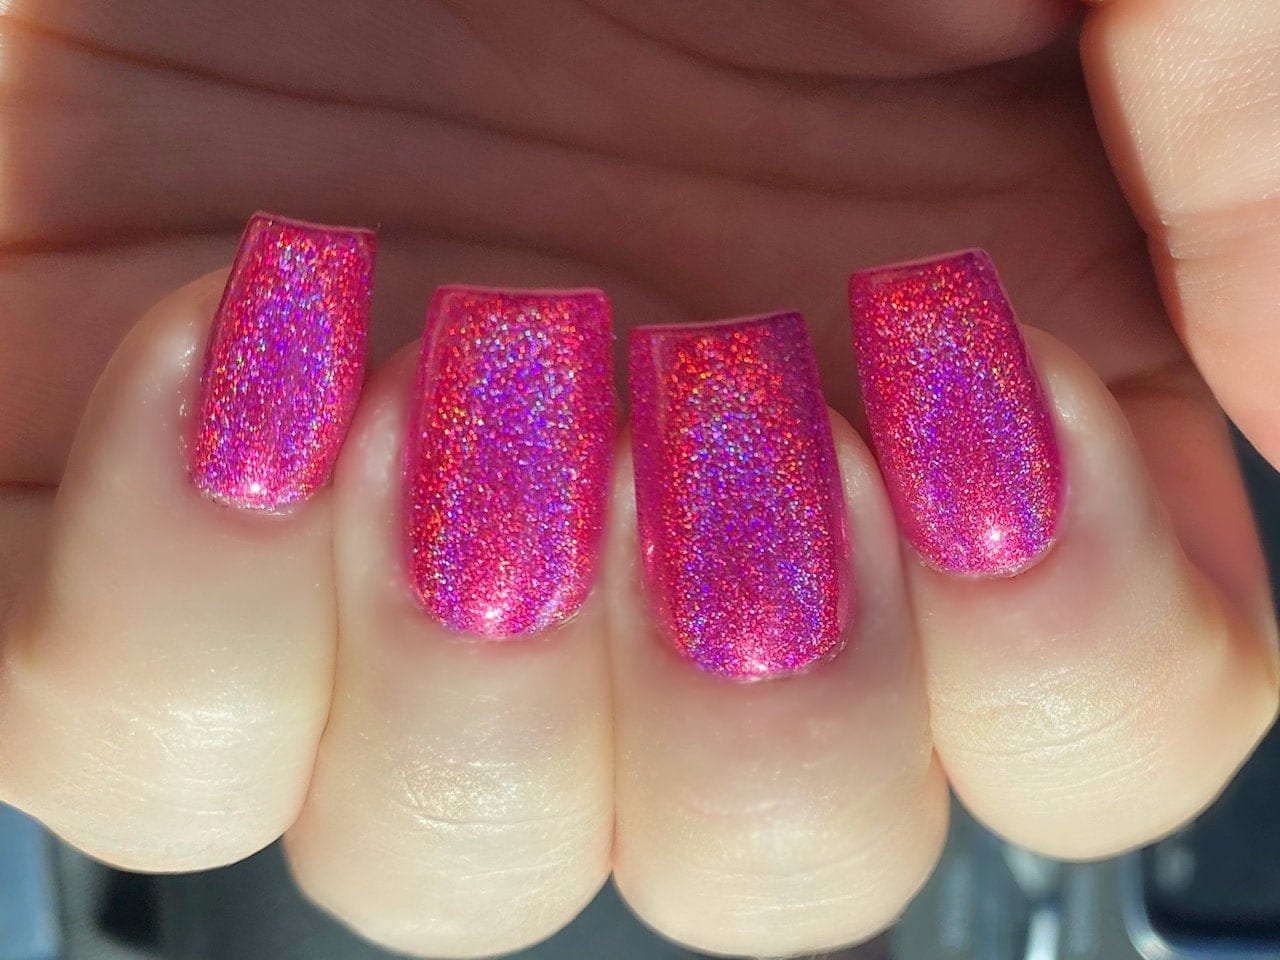 Hottie Tottie Hot Pink Blue Shimmer Multi-color Shifting Polish:  Custom-blended Glitter Nail Polish / Indie Lacquer / Polish Me Silly - Etsy